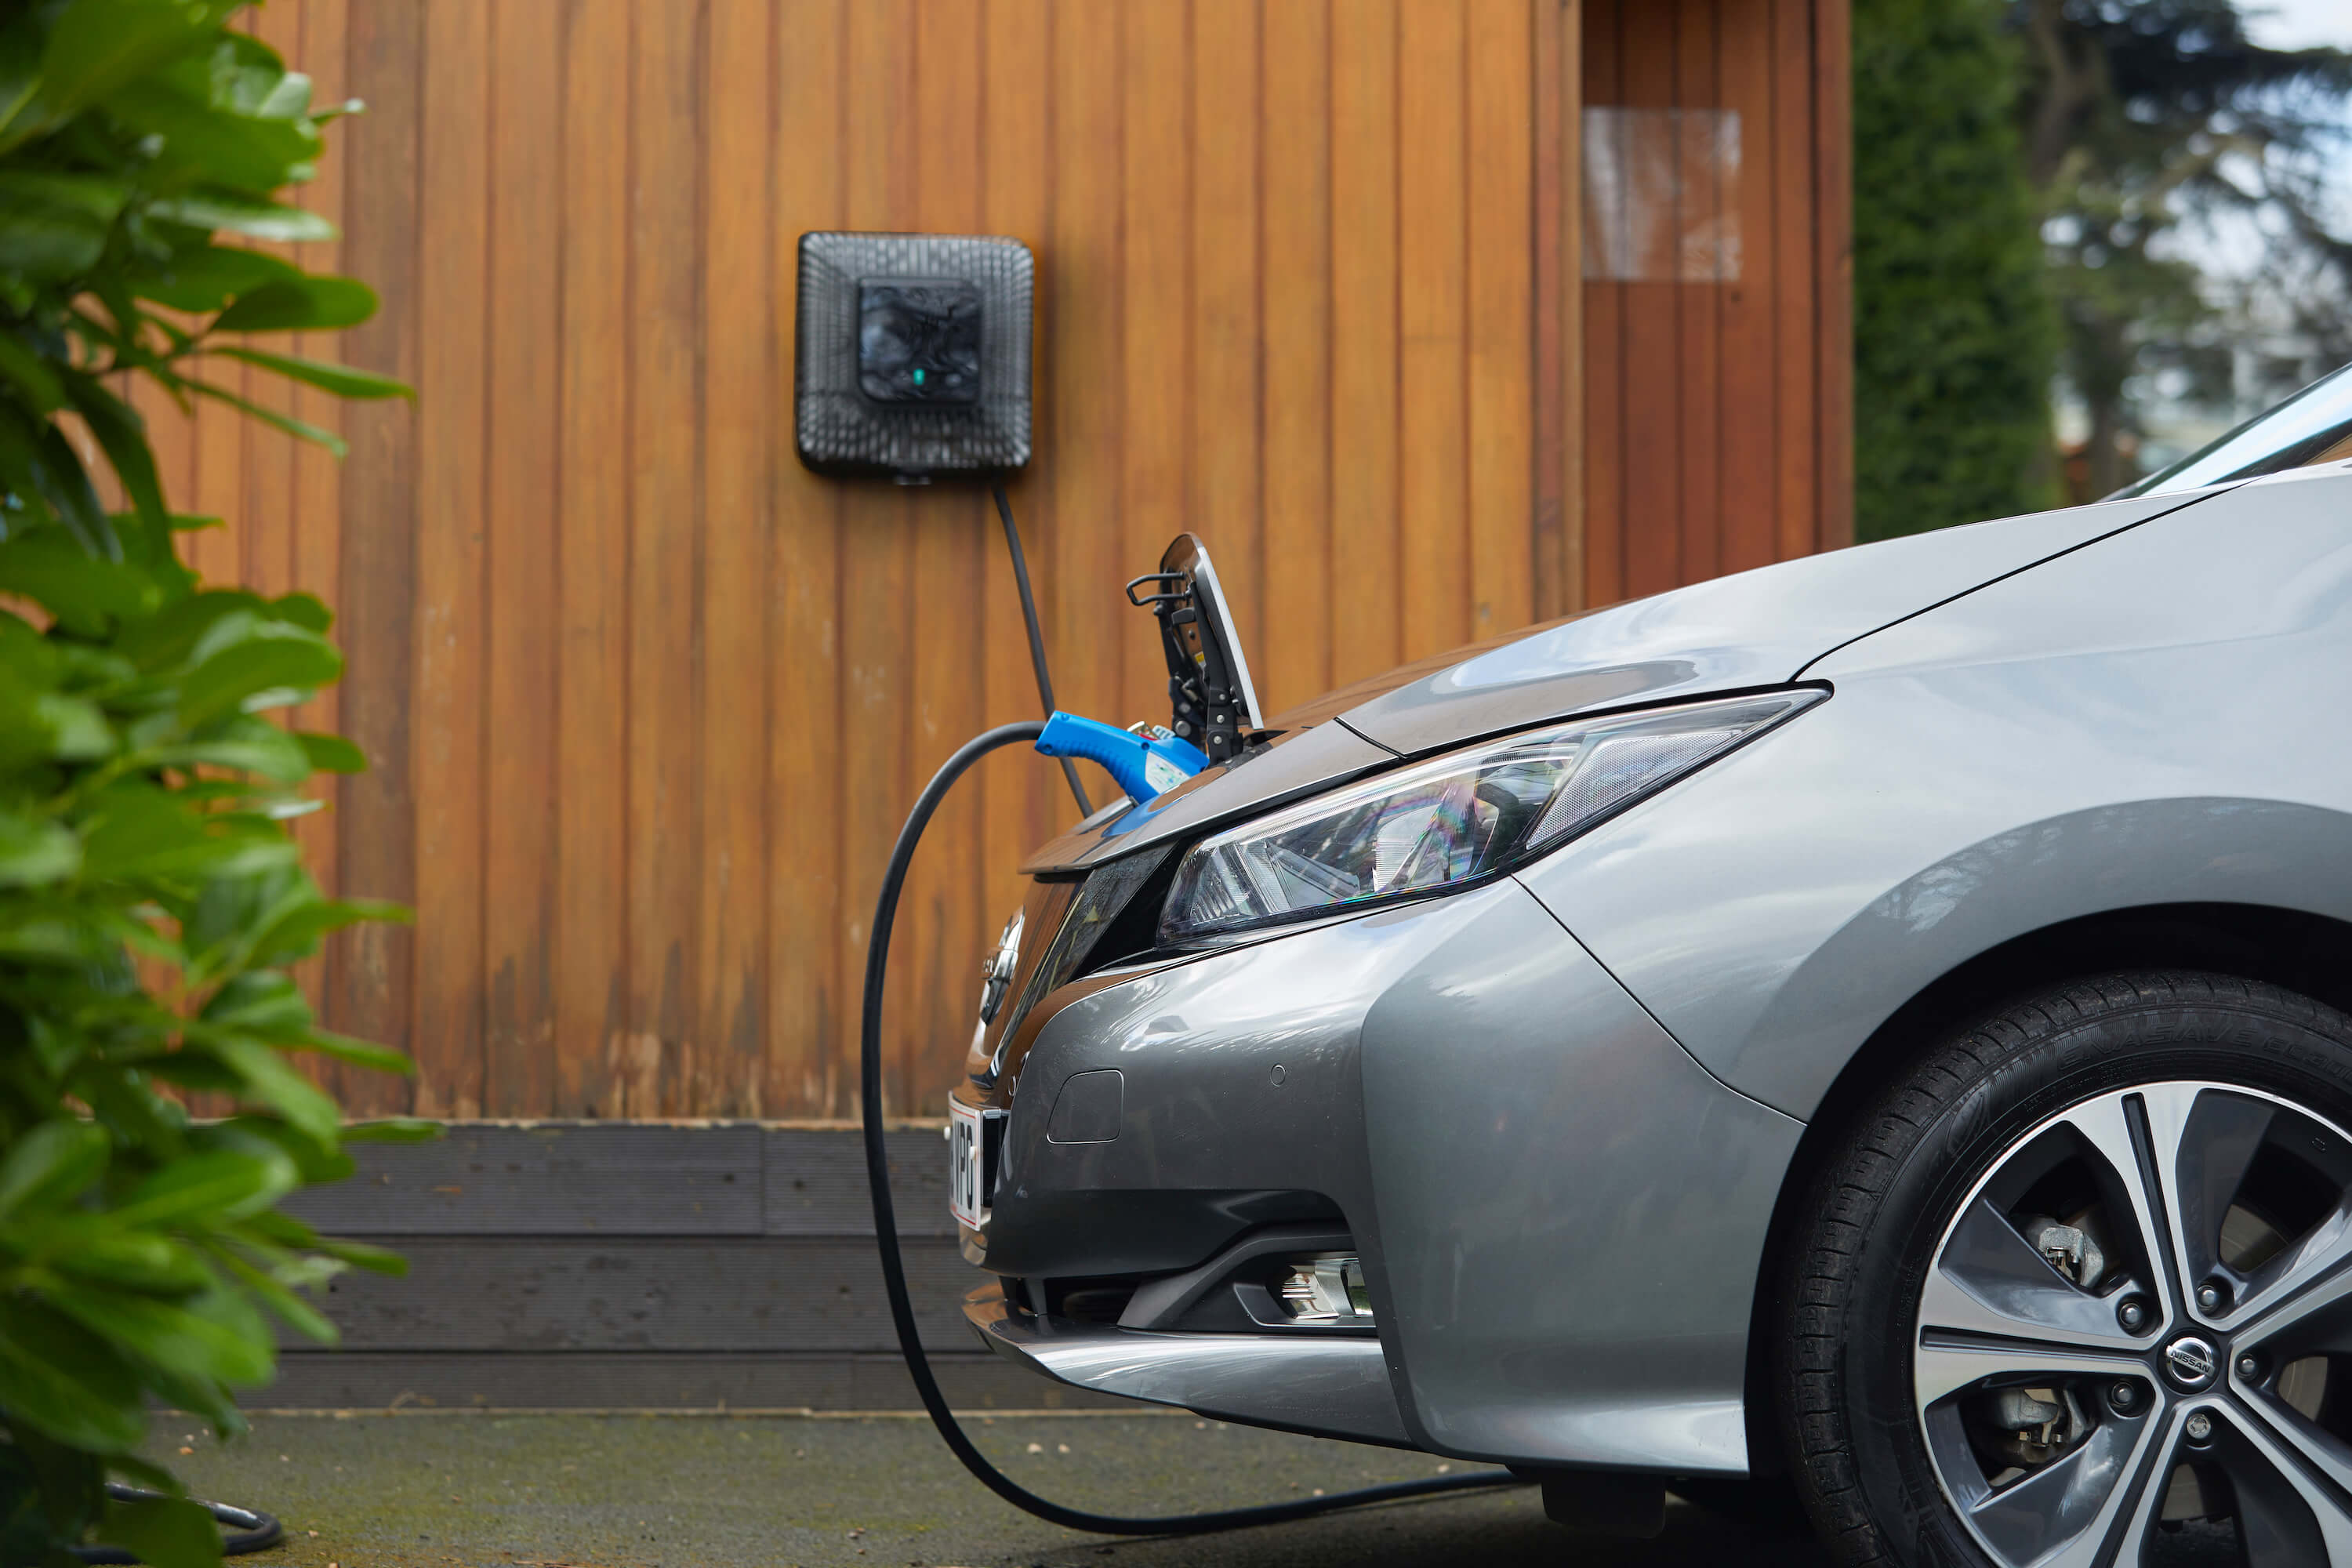 Wallbox solution allows drivers to transfer energy into the grid (Credit: Electric Nation)